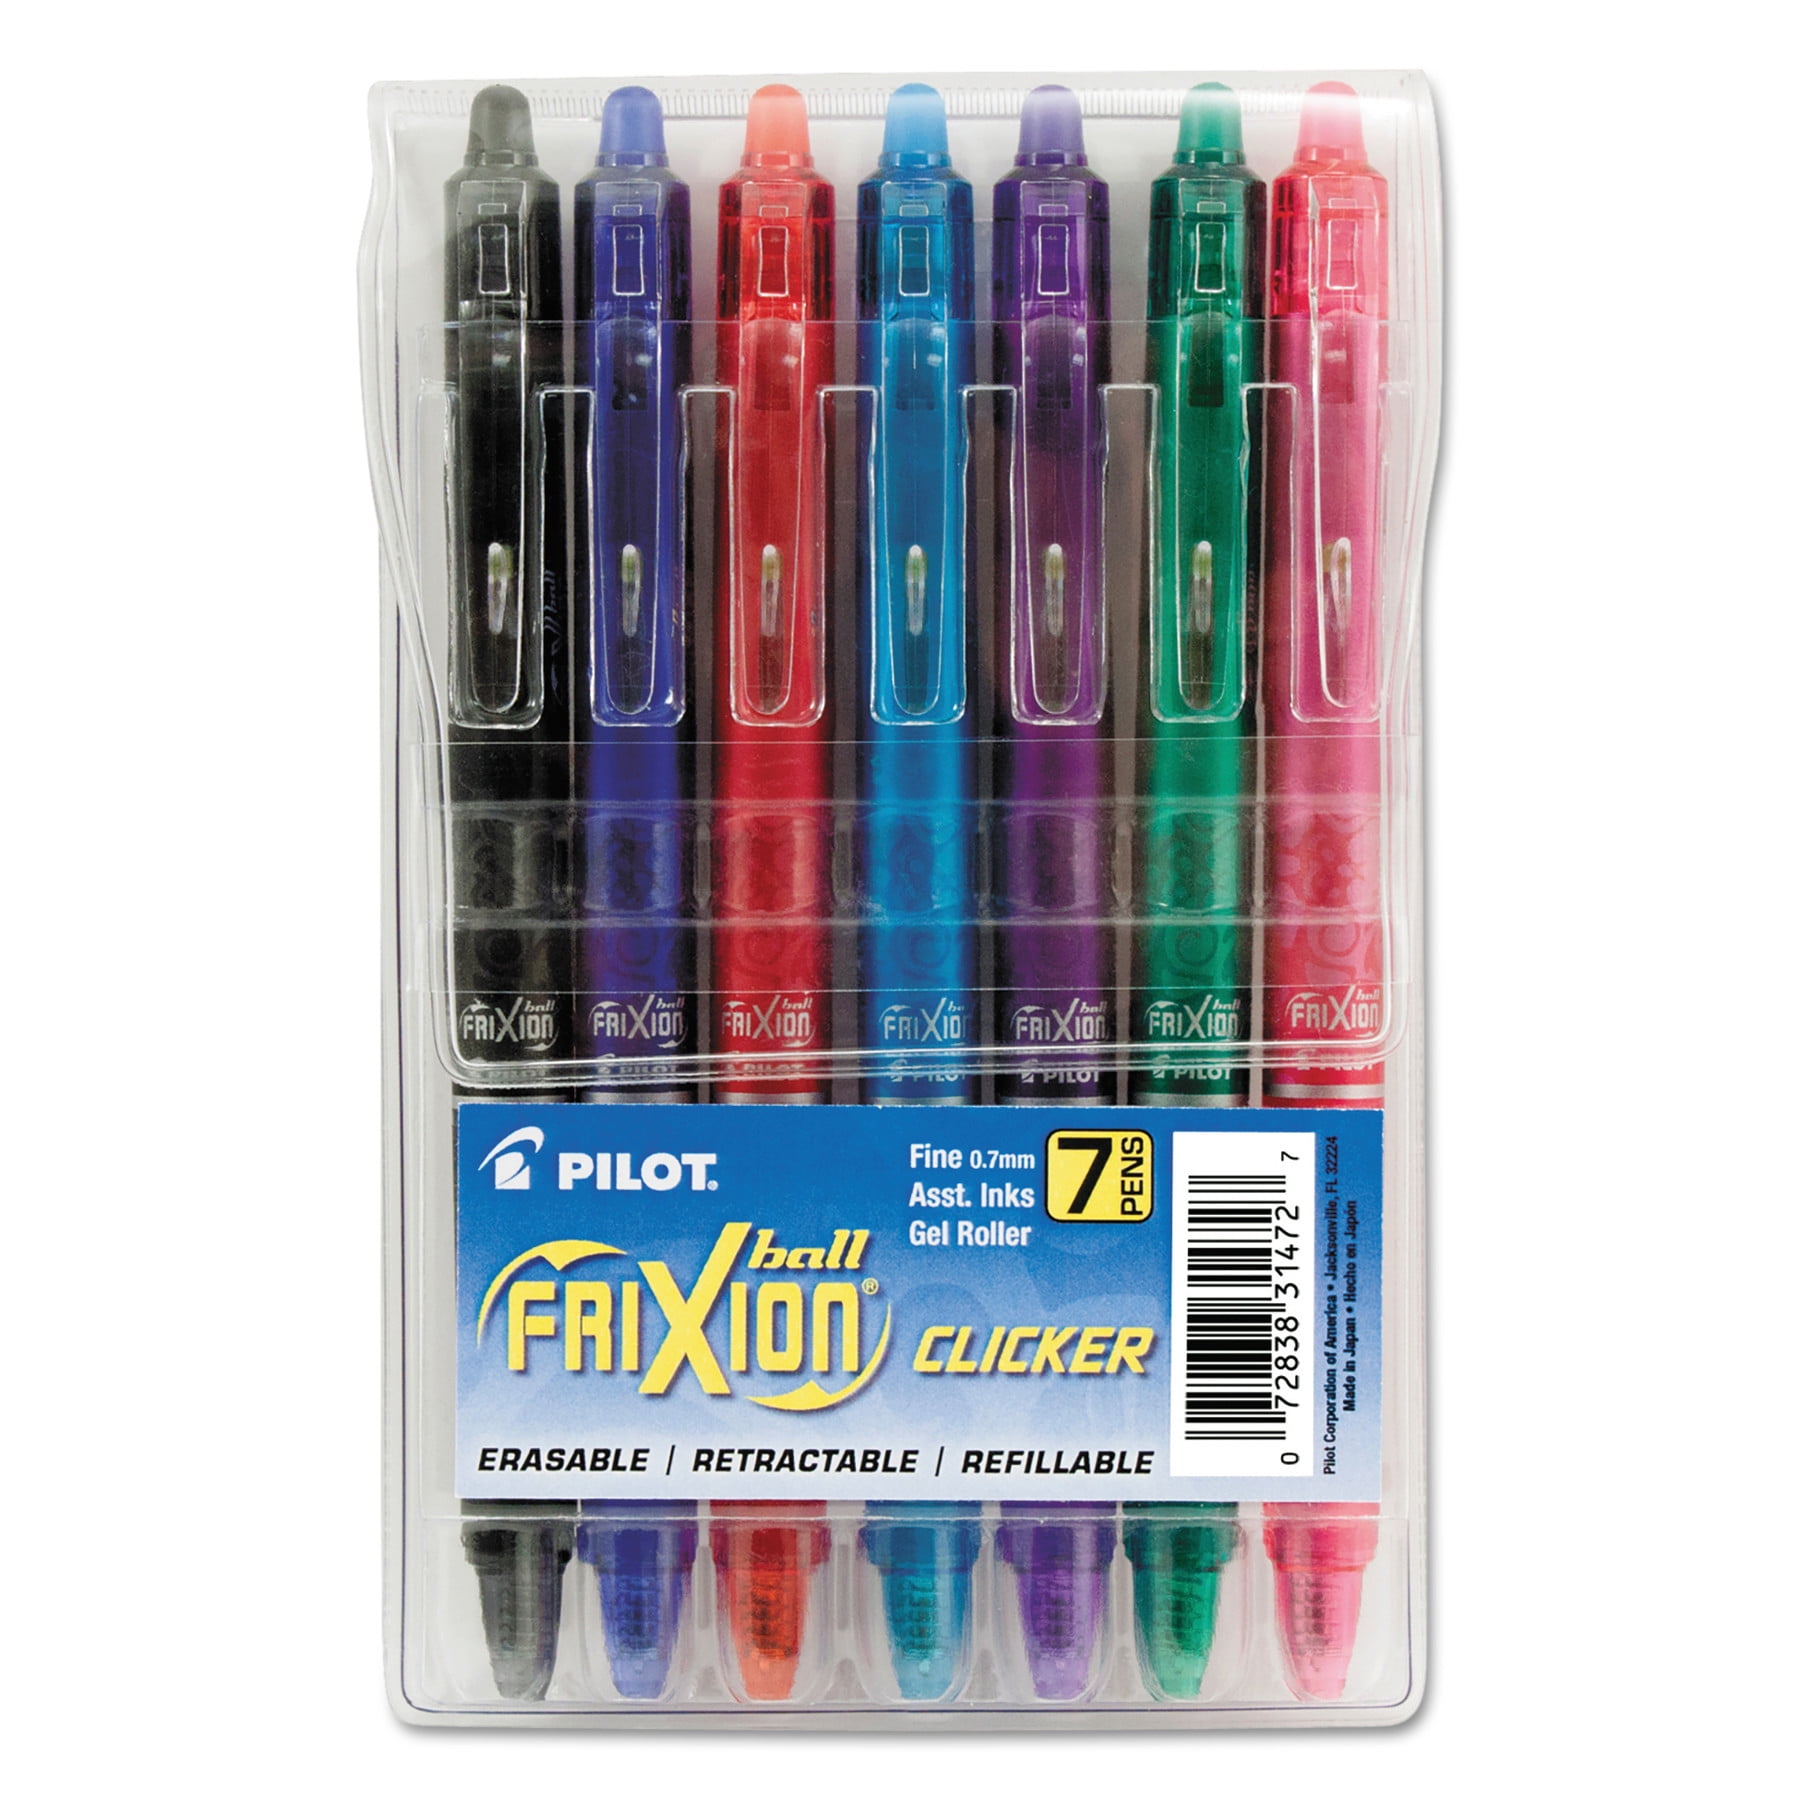 Pilot FriXion Erasable Pens, Markers and Highlighters, 17 Count 852097079